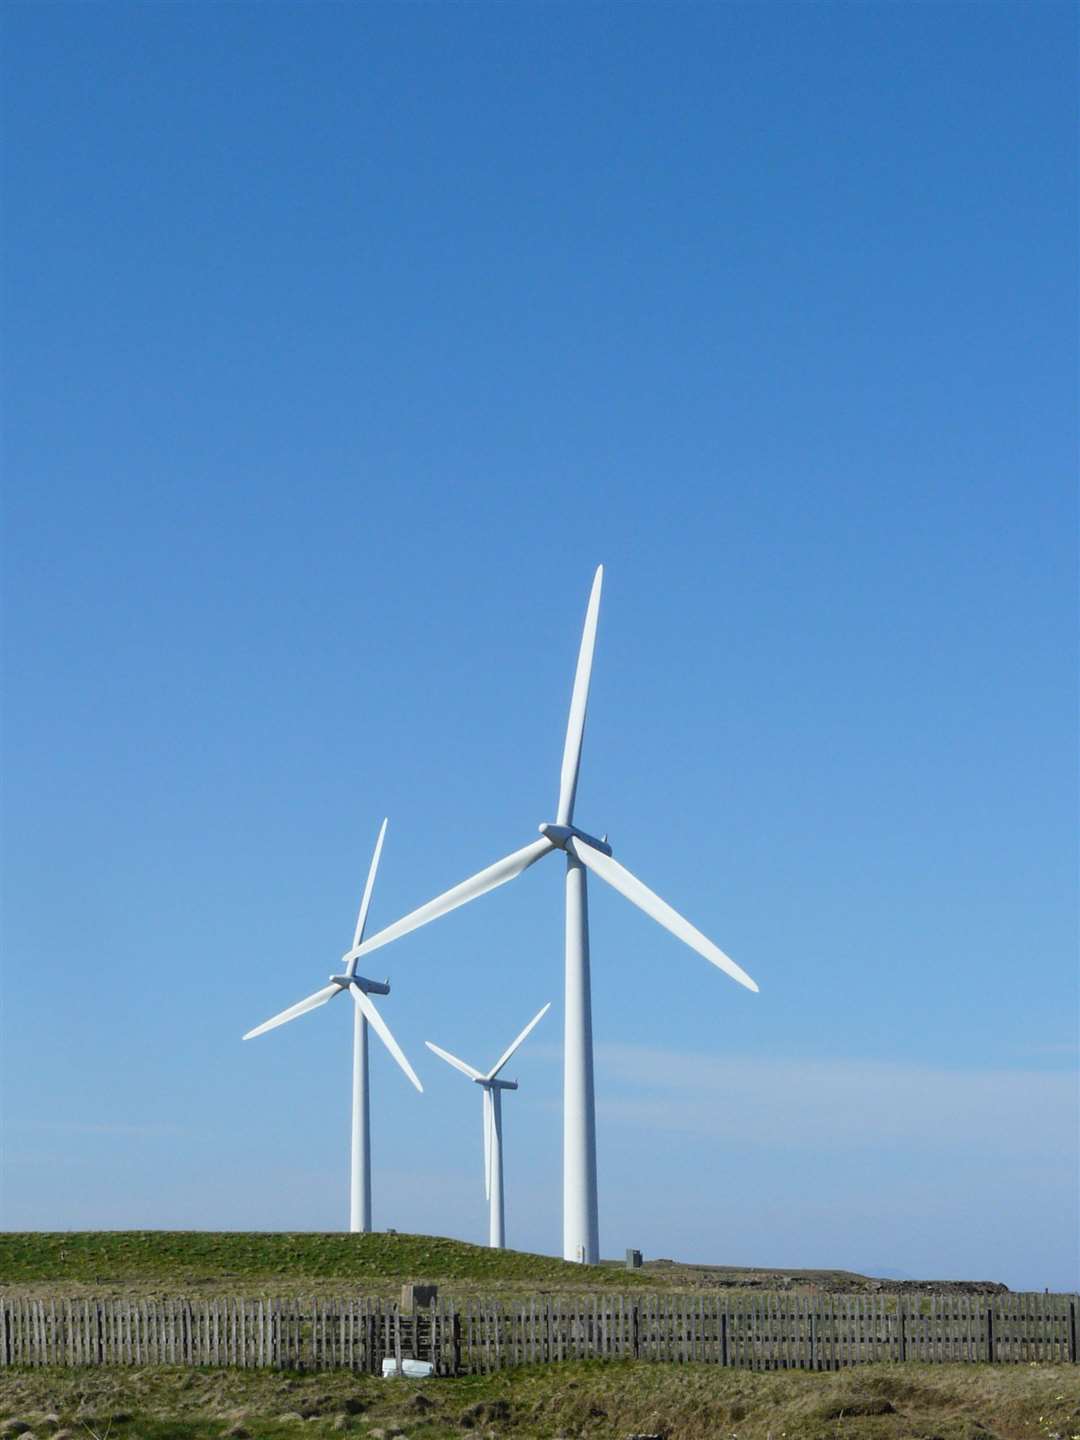 RES has had a presence in Caithness for 20 years with the Forss wind farm.